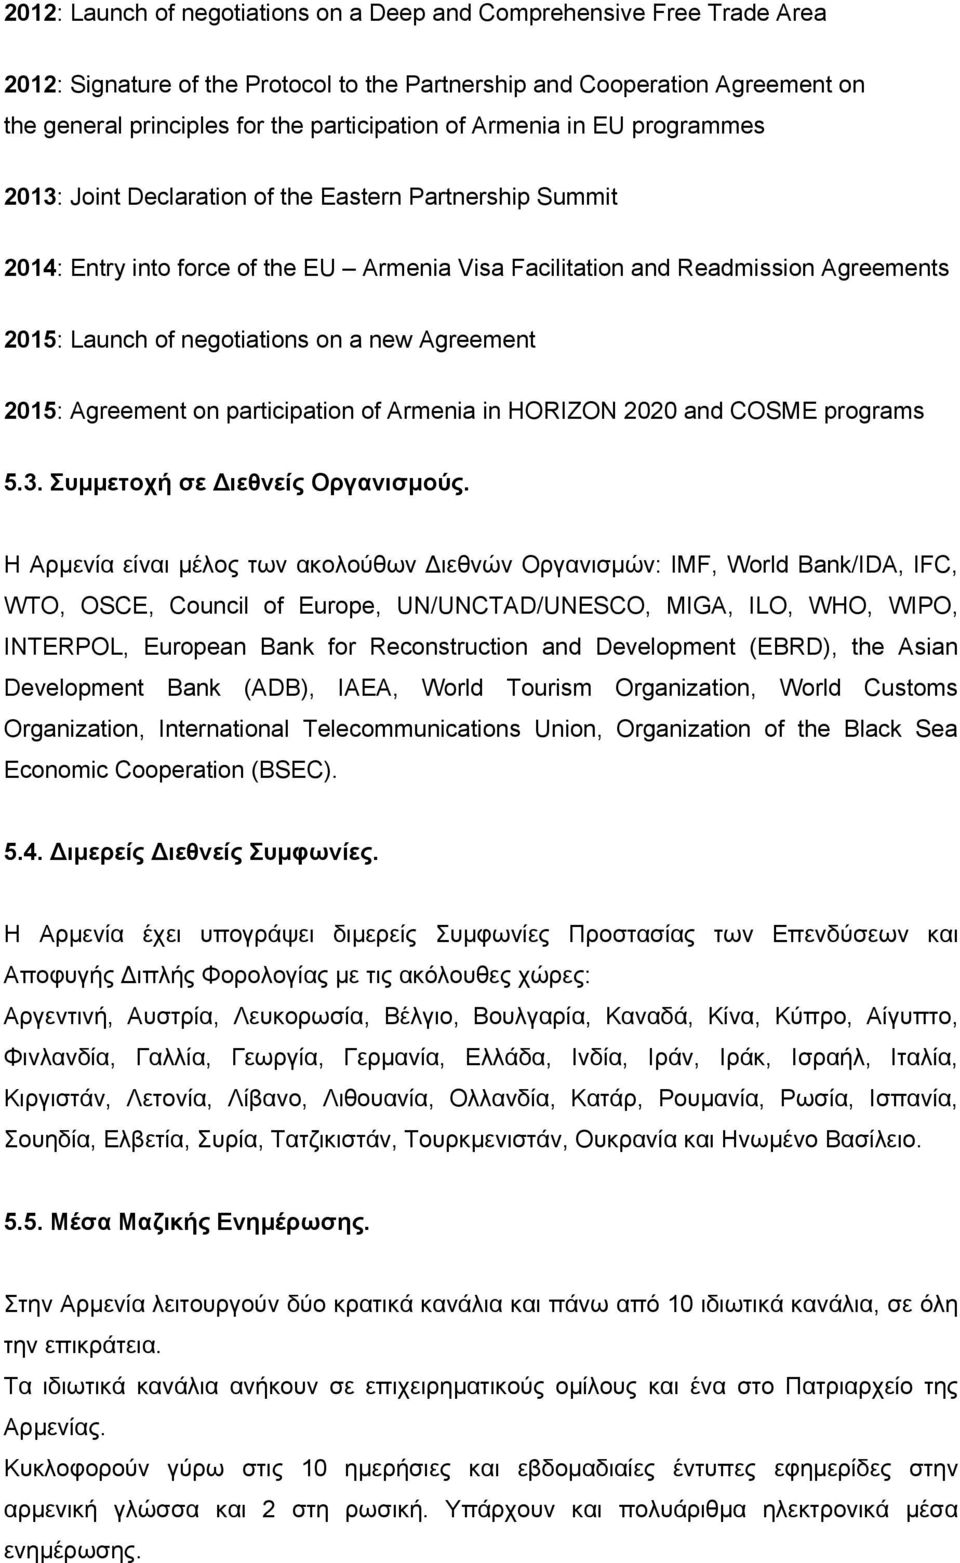 negotiations on a new Agreement 2015: Agreement on participation of Armenia in HORIZON 2020 and COSME programs 5.3. Συµµετοχή σε ιεθνείς Οργανισµούς.